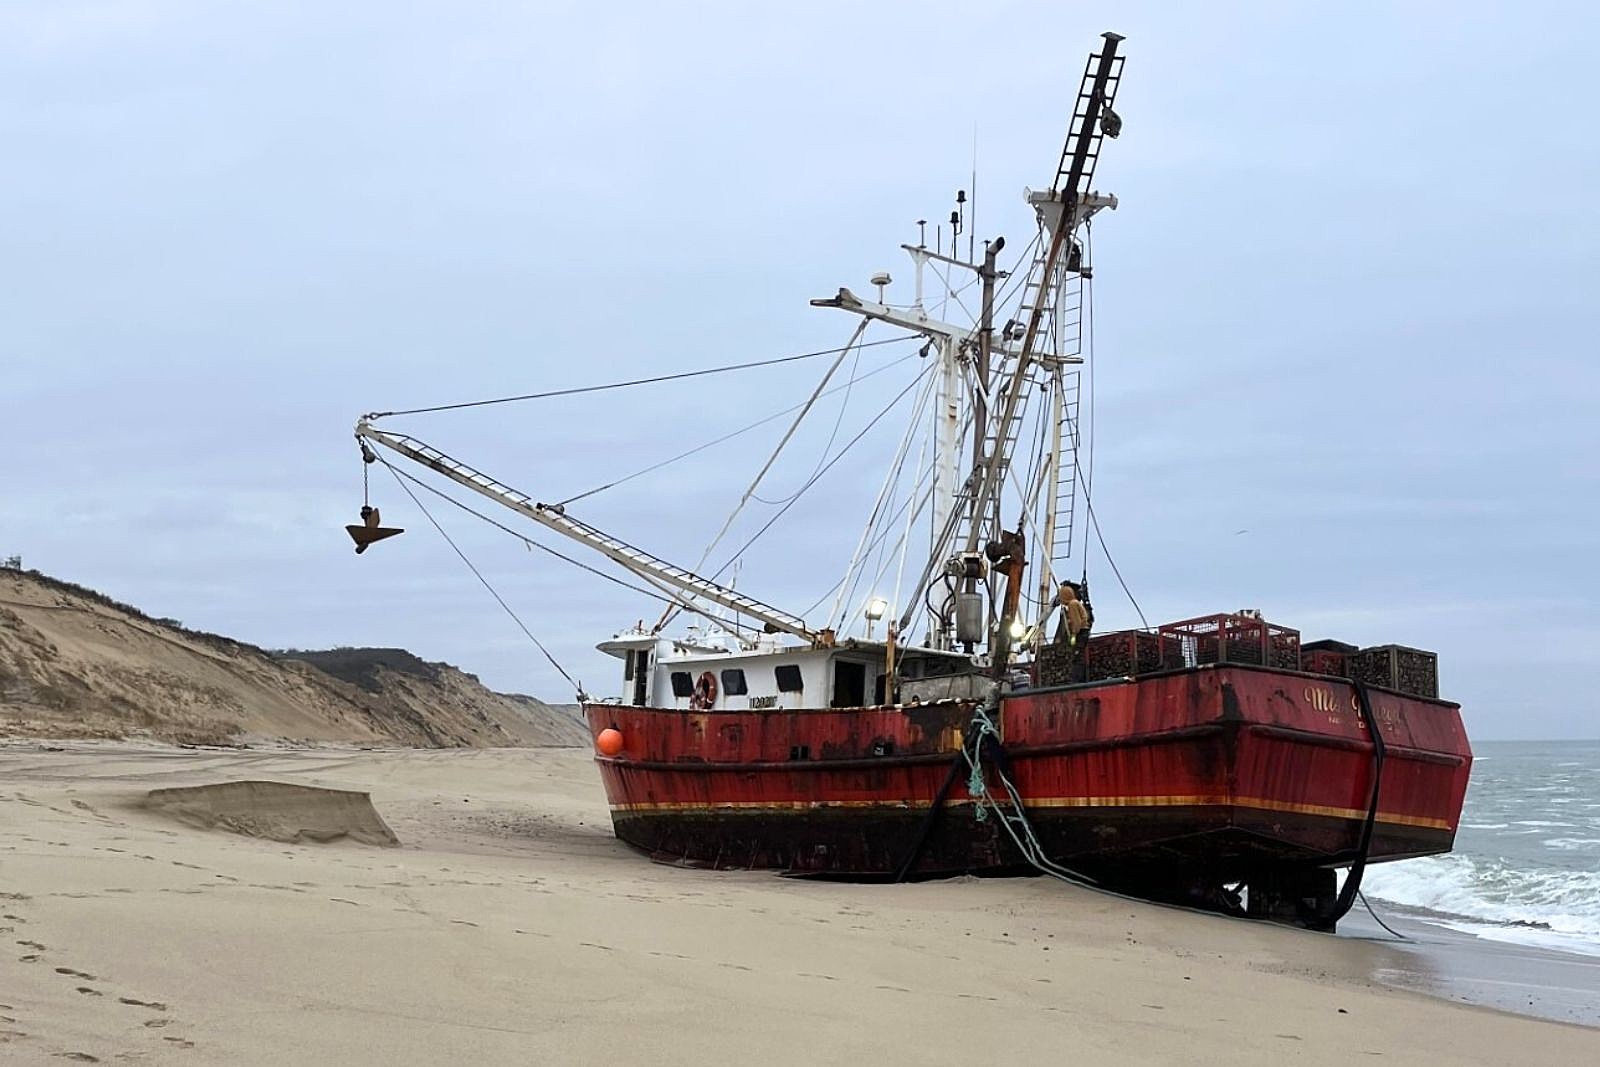 Cape Cod Fishing Vessel Found 'Taking A Vacation' On Beach